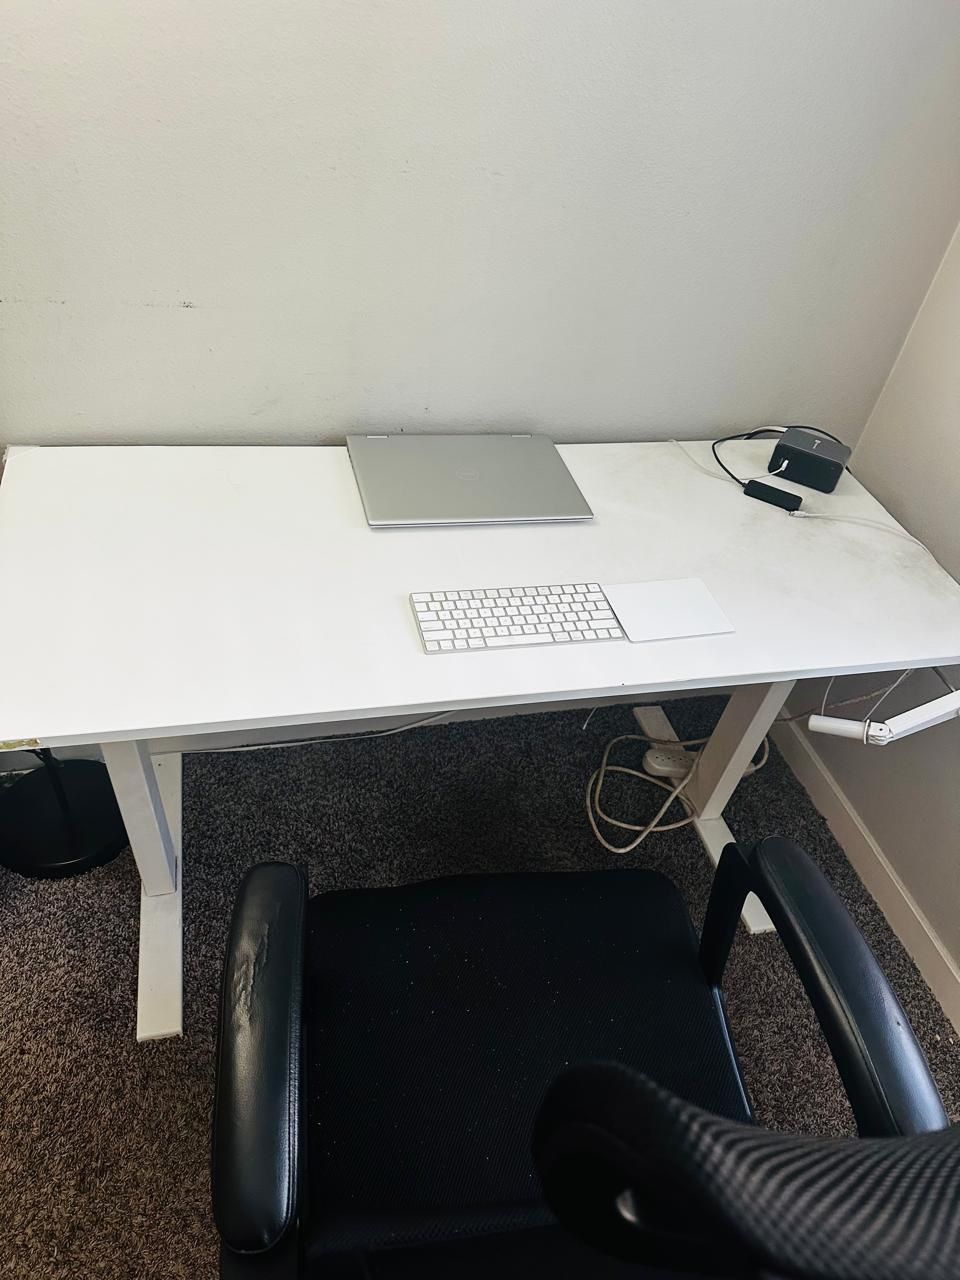 Desk and Chair - Height Adjustable 